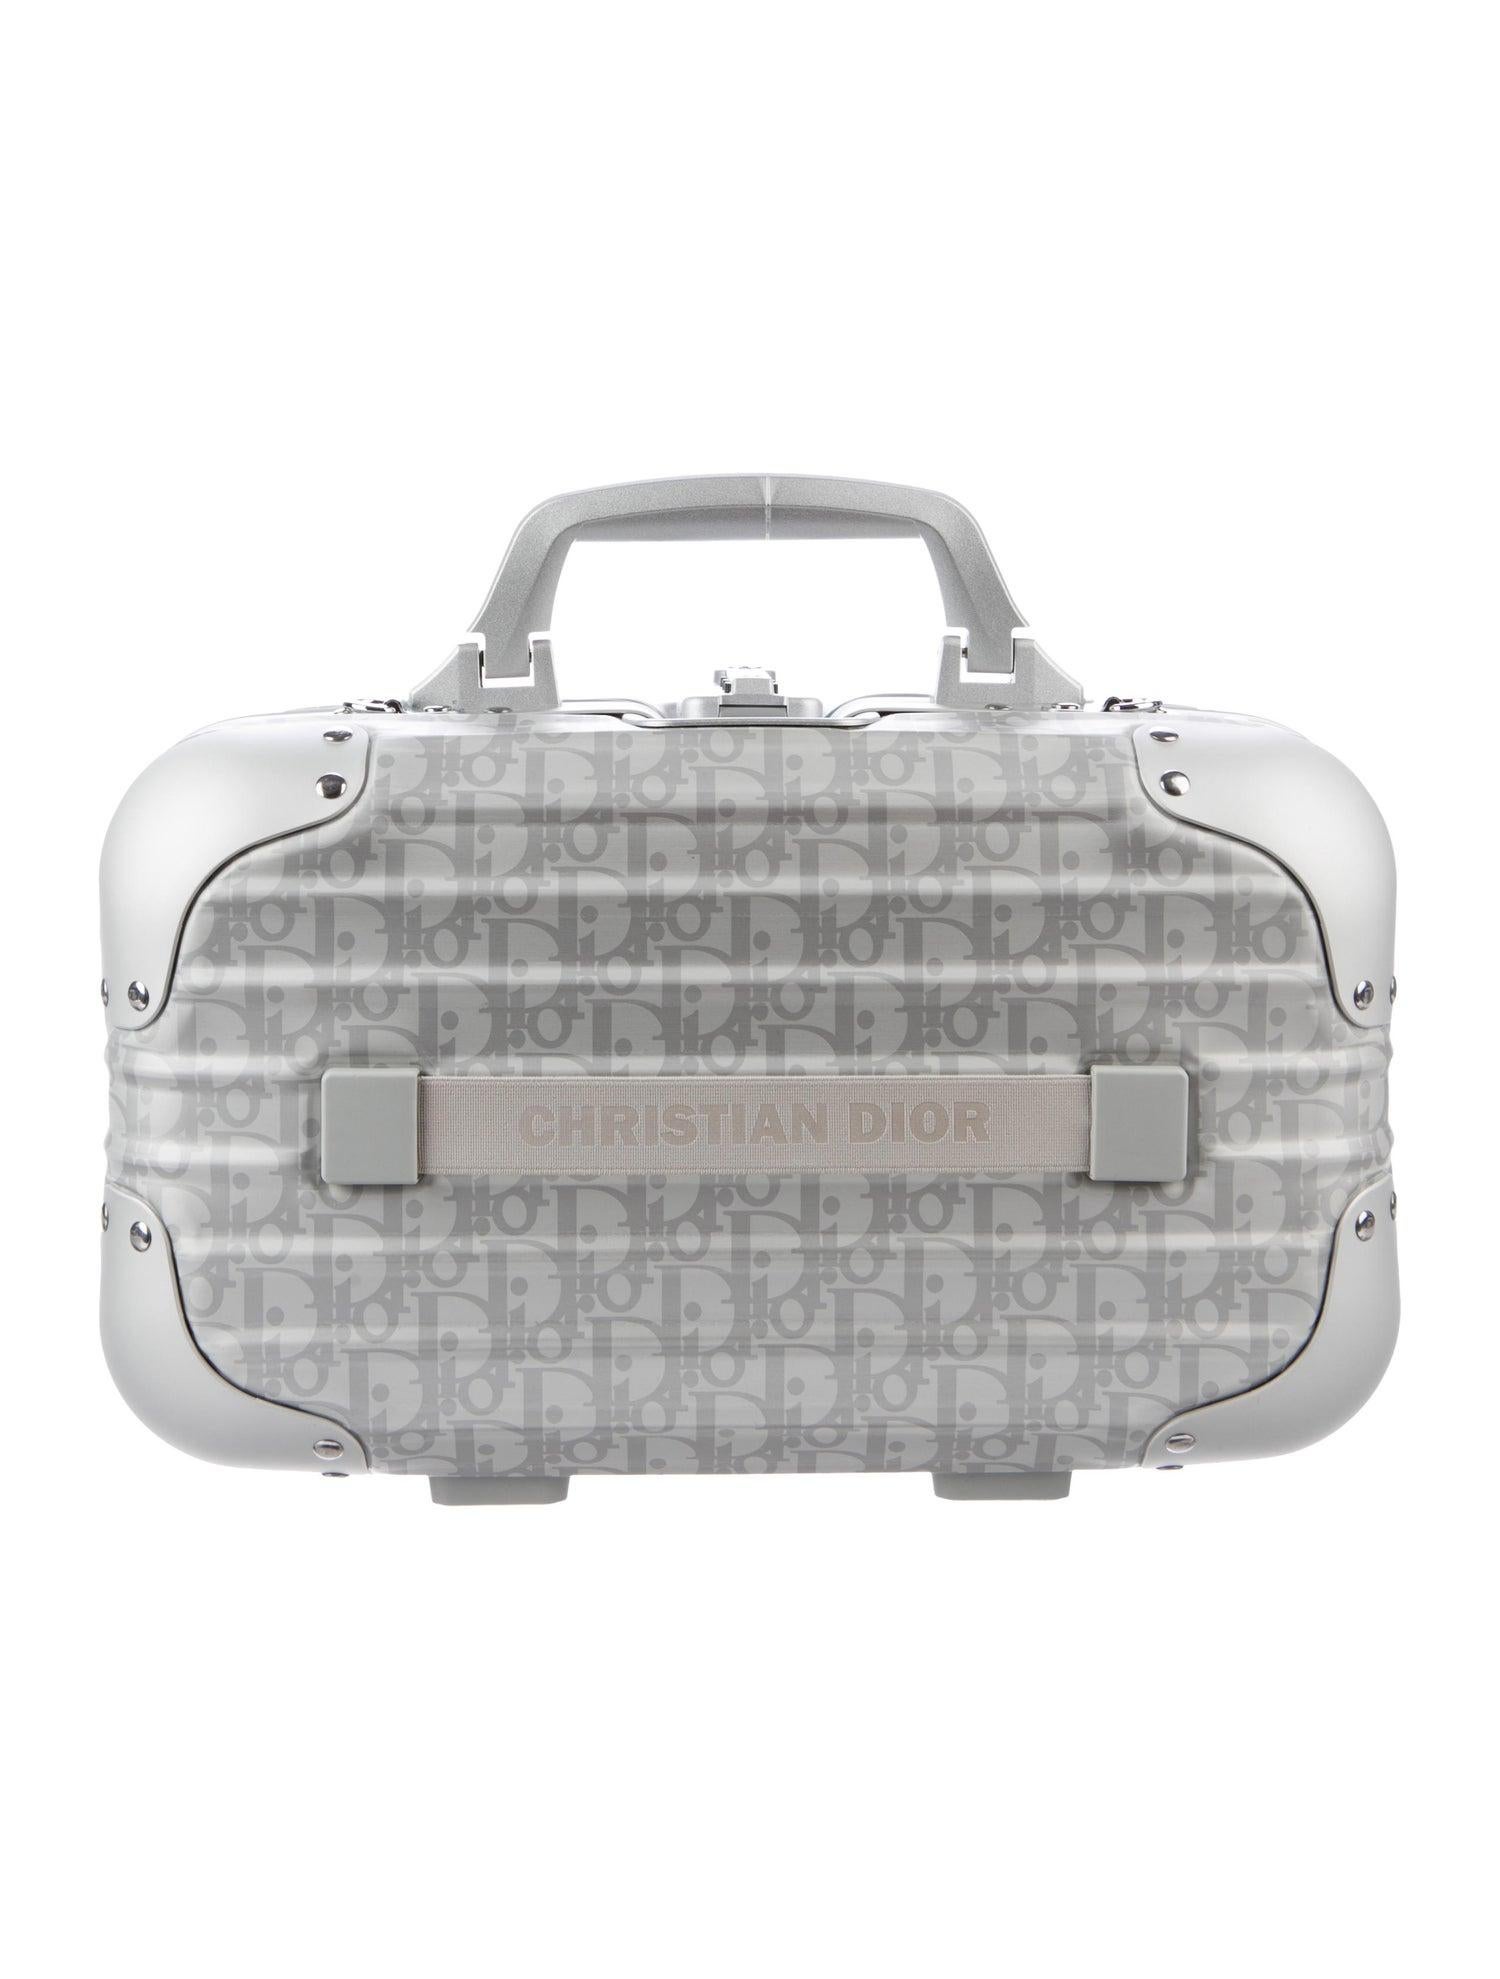 Women's or Men's Christian Dior NEW Limited Edition Silver Aluminum Travel Top Handle Satchel Bag